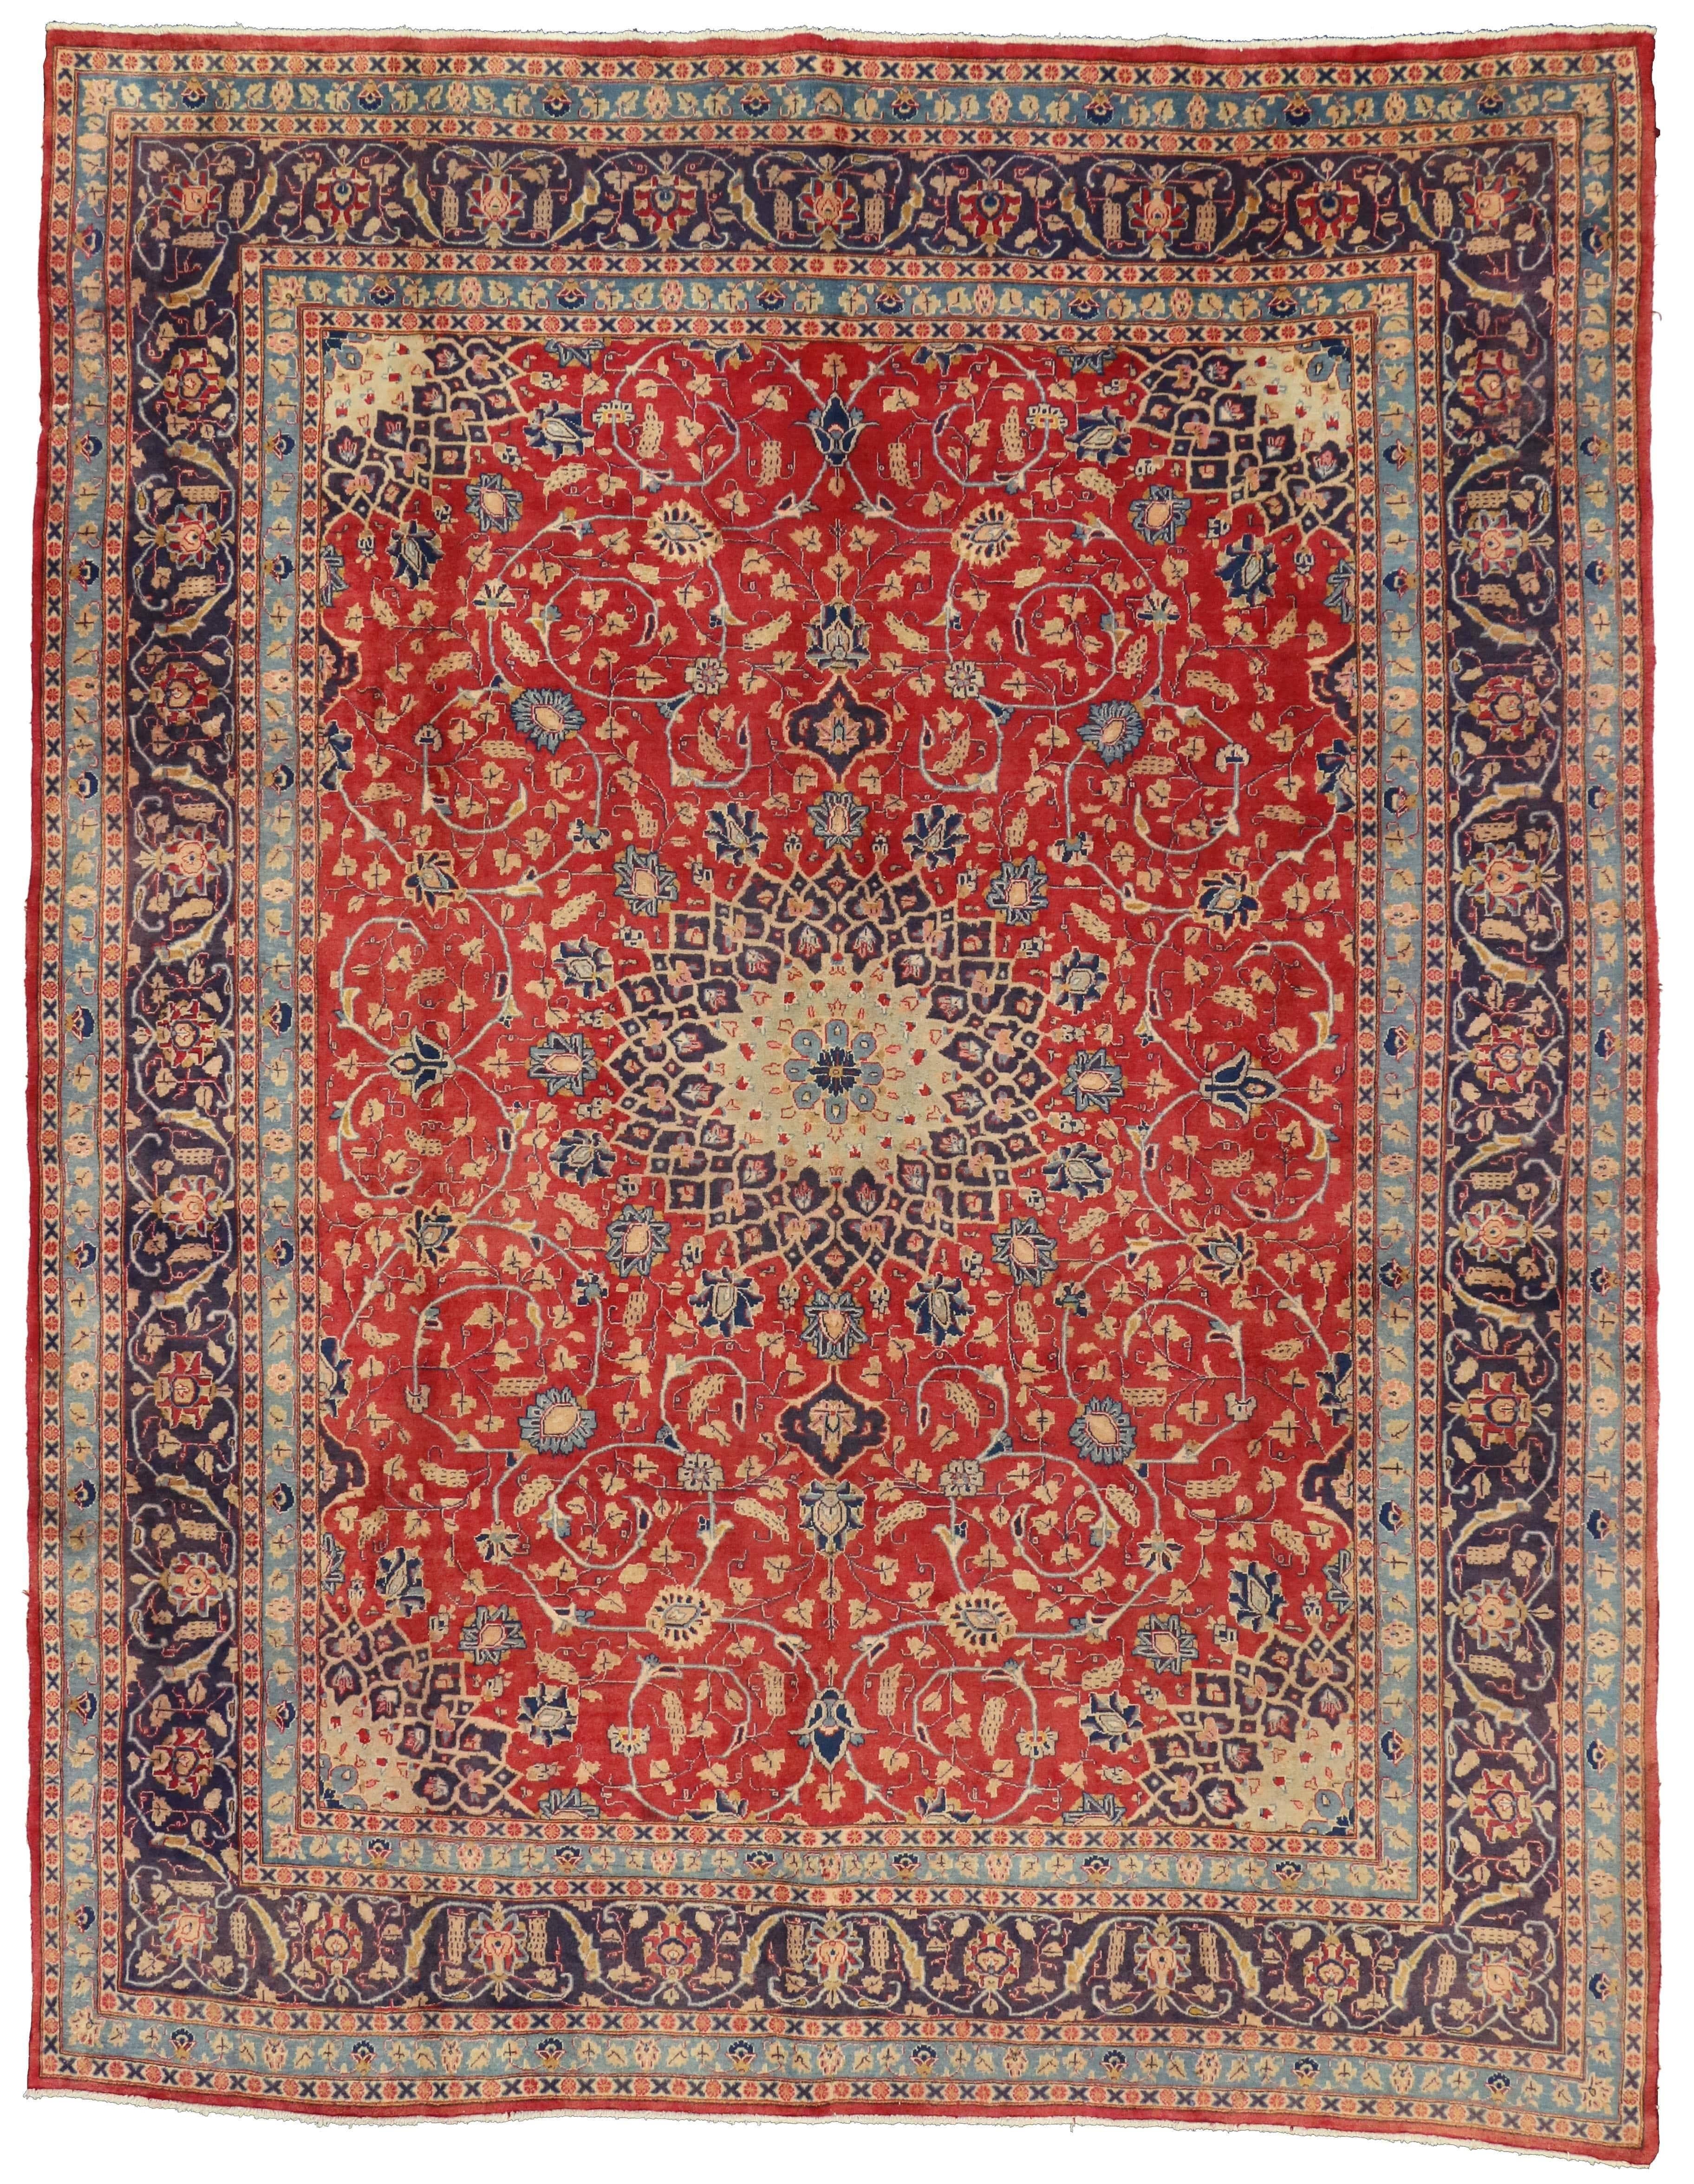 Wool Vintage Persian Khorassan Rug with Traditional Style